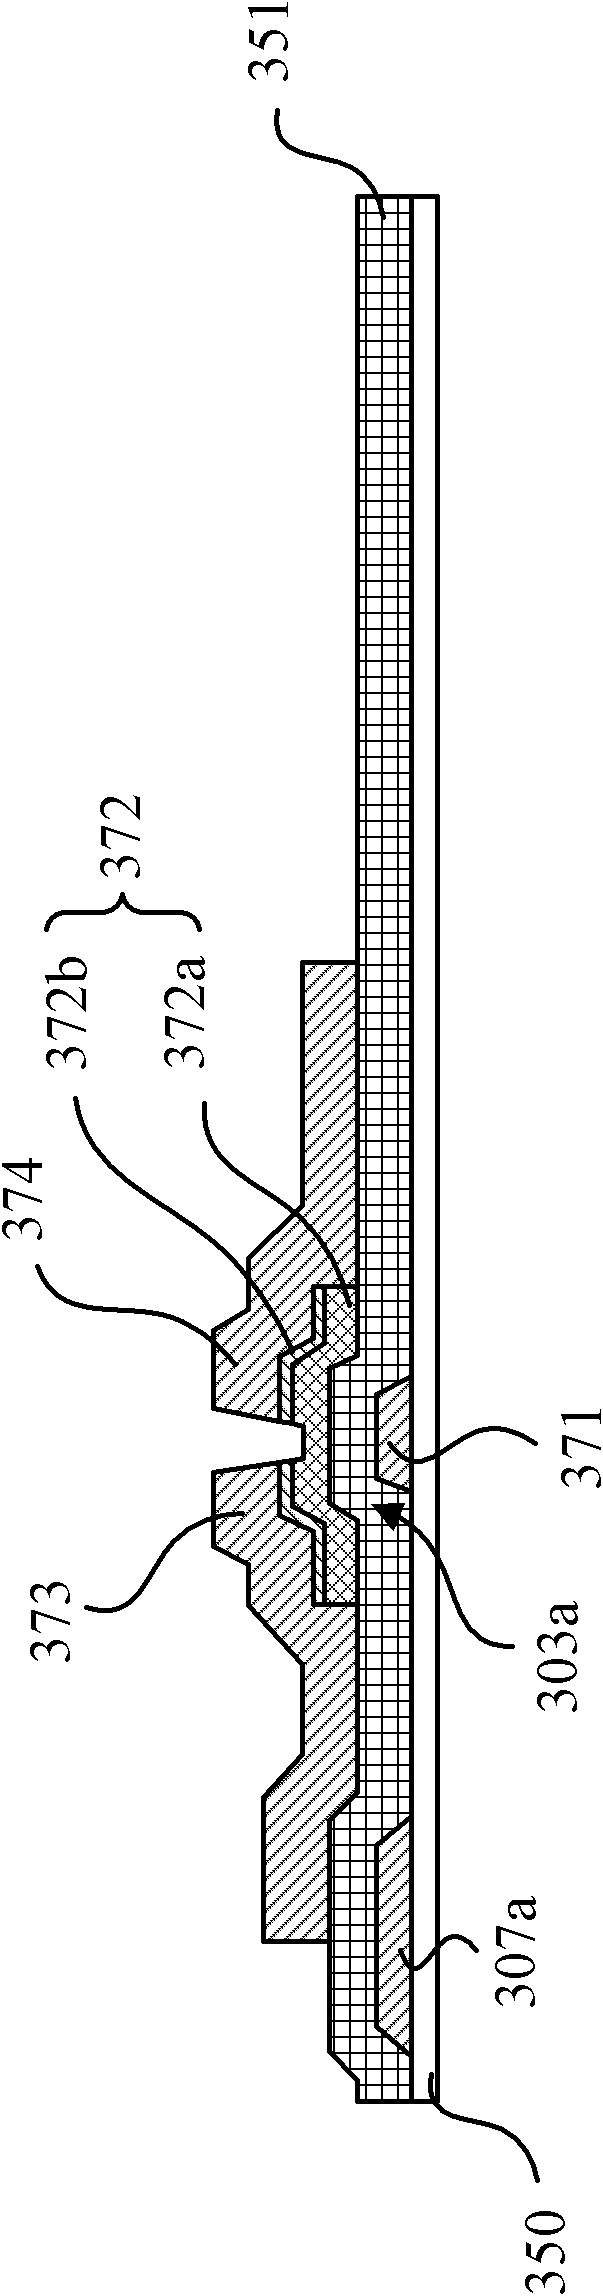 Flat-panel display panel and manufacturing method thereof